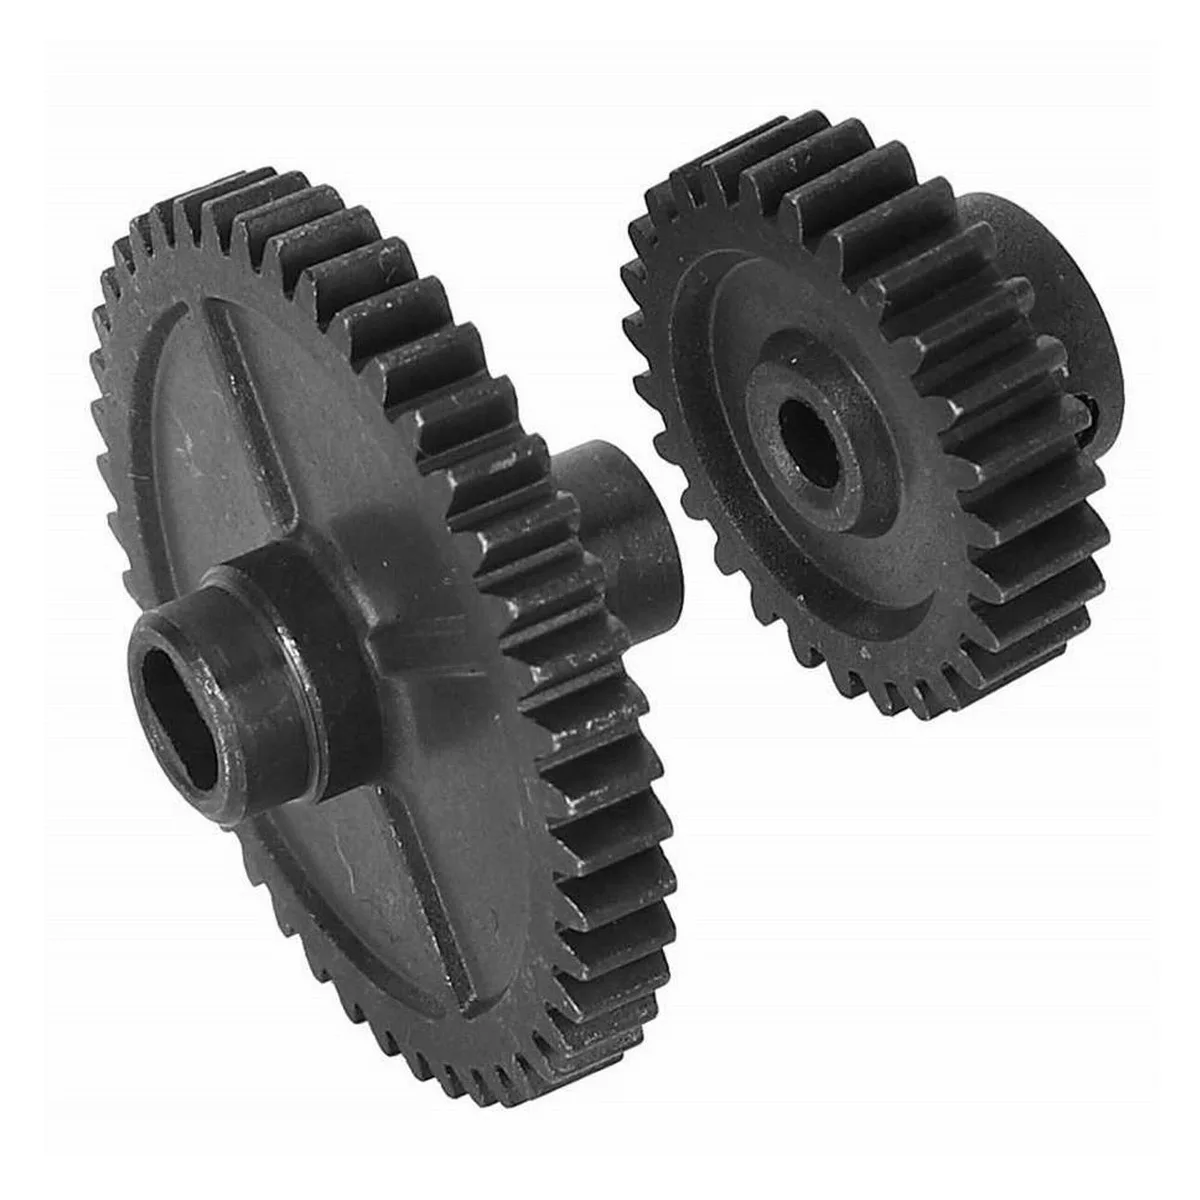 Upgrade Parts Metal 44T Reduction Gear 22T Motor Gear Part For WLtoys 144001 1/14 4WD RC Car